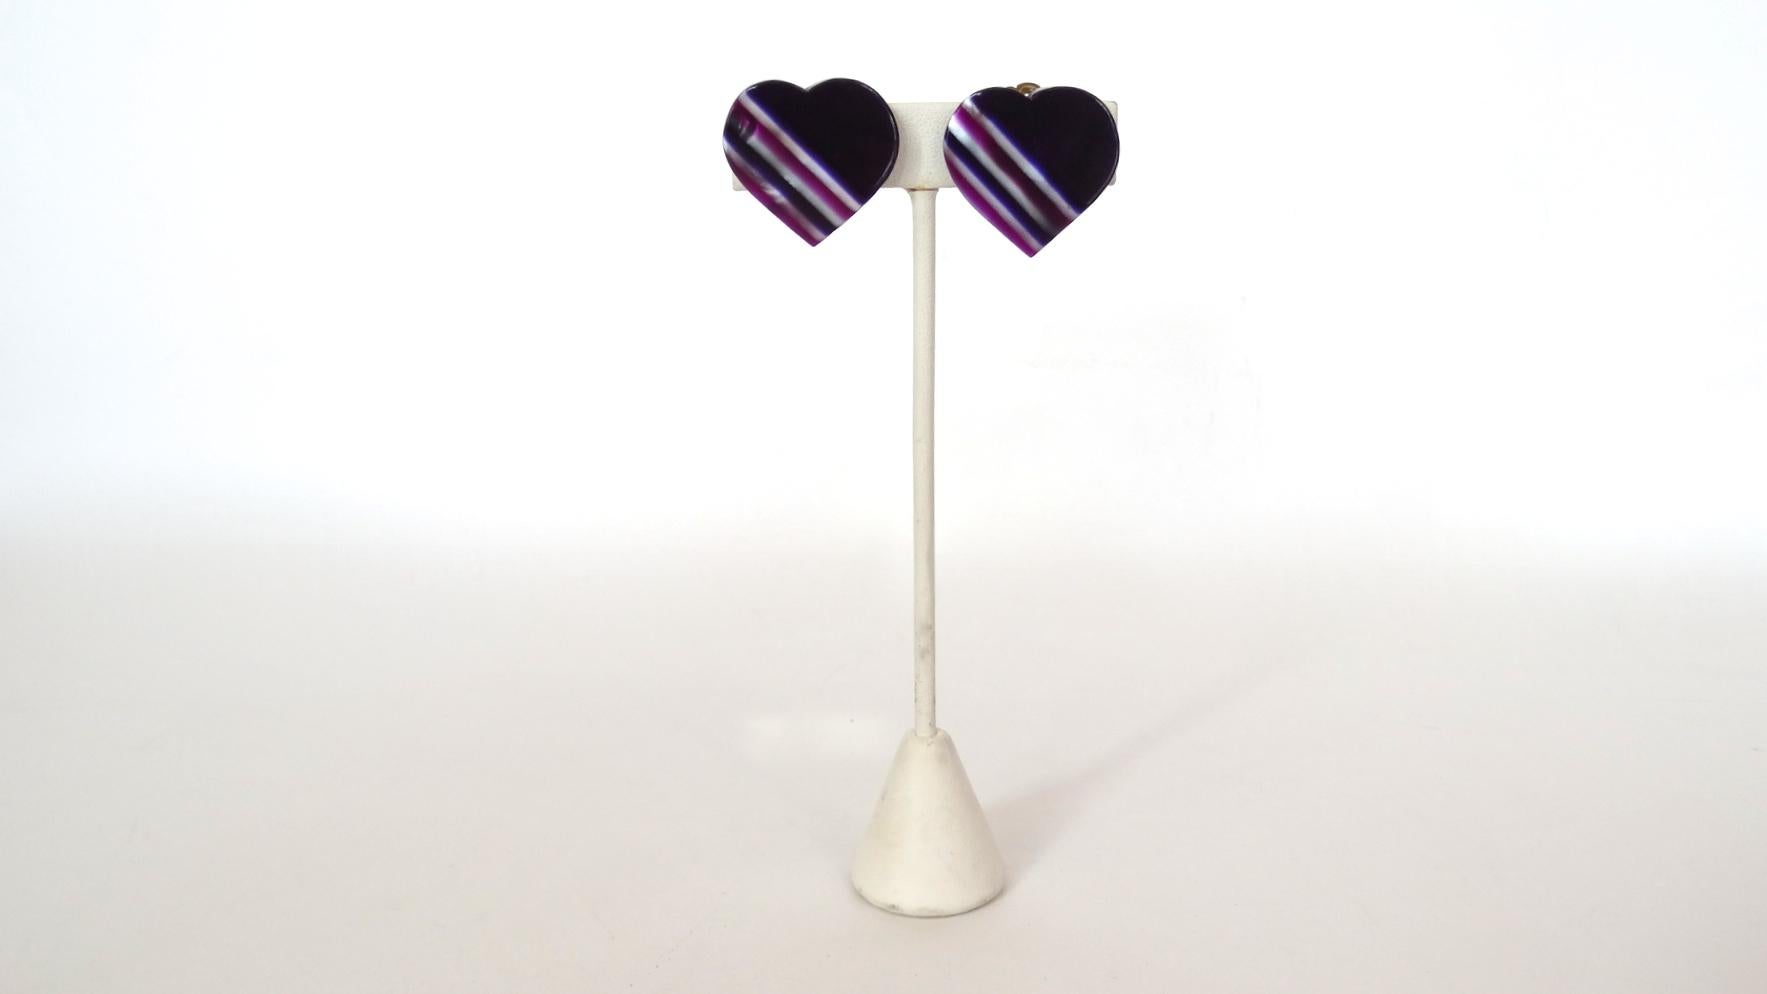 How Could You Not Love These Adorable Earrings!? Circa 1970's, these Lea Stein heart shaped earrings feature an asymmetrical pearl white, eggplant and magenta striped design. The perfect earrings to accessorize with any outfit! Clip-on closures,